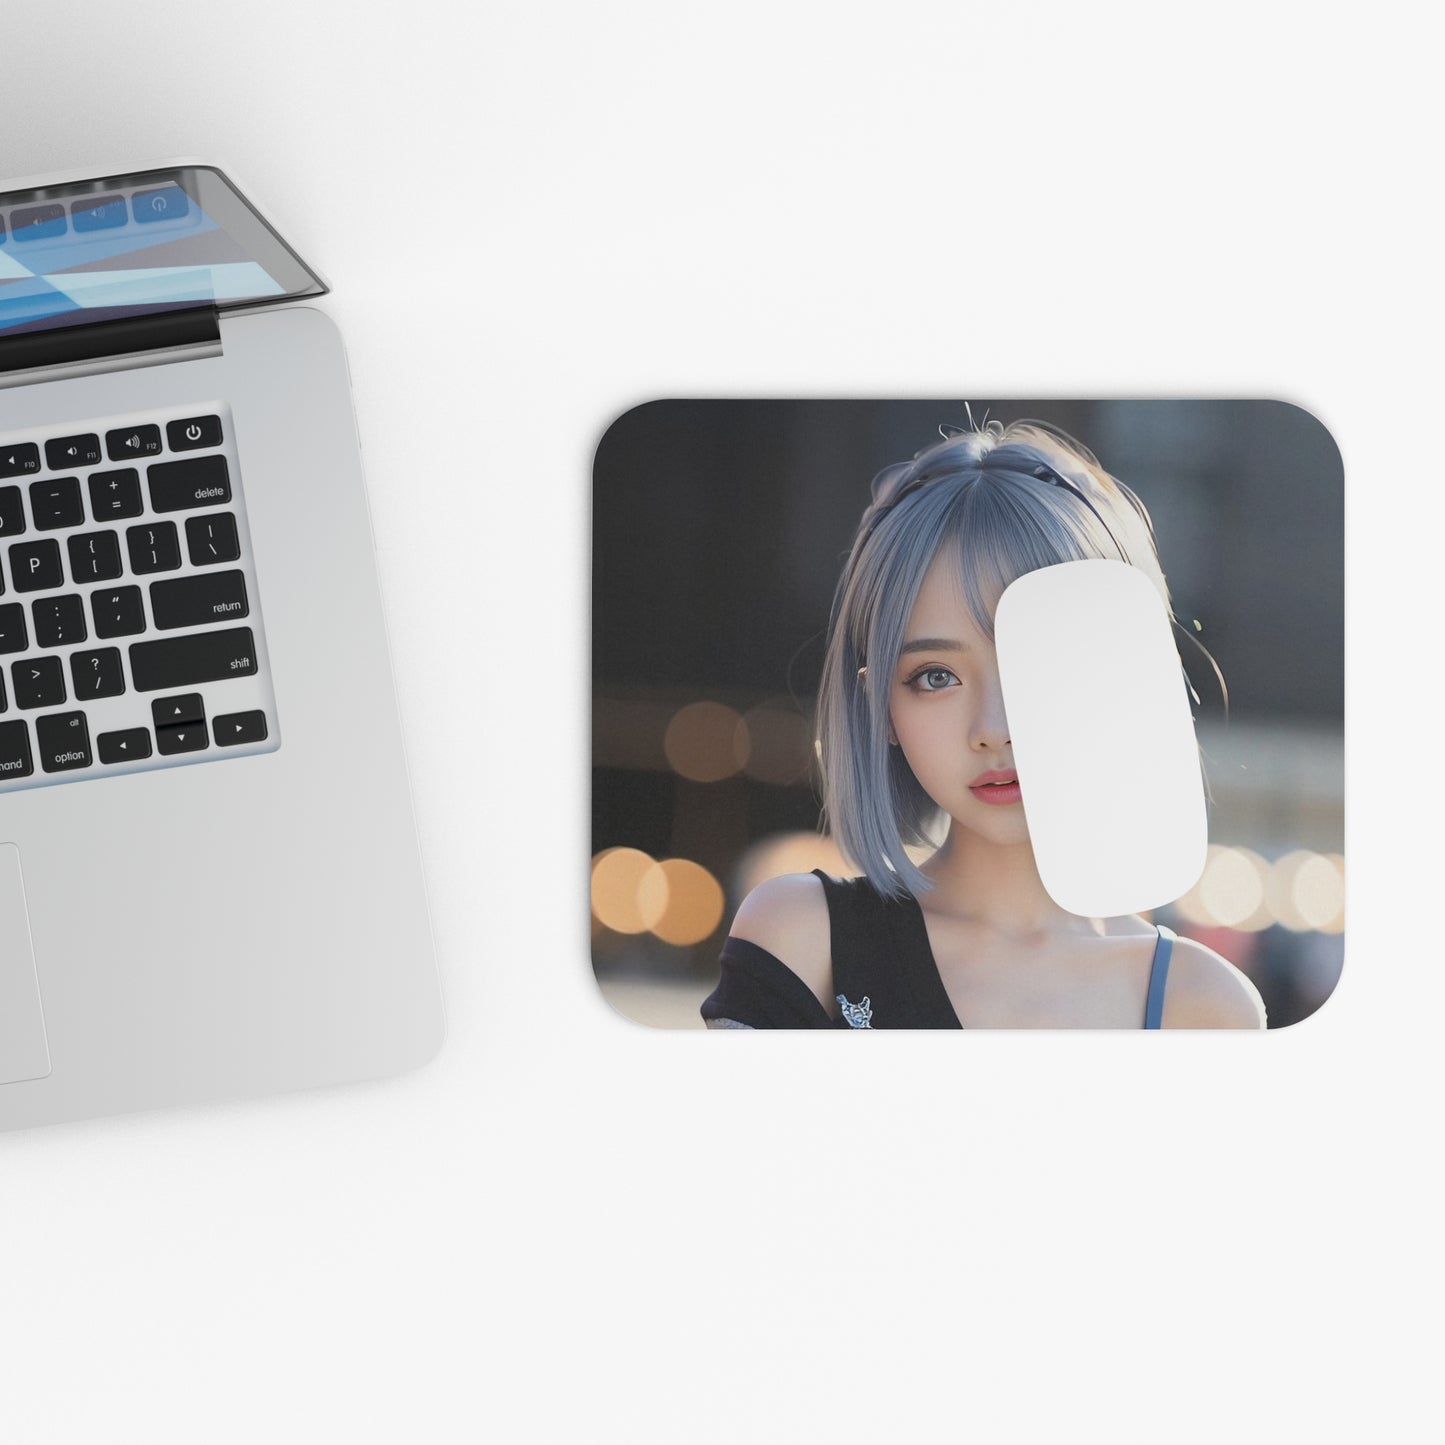 mouse pad delivers smooth mouse sliding action